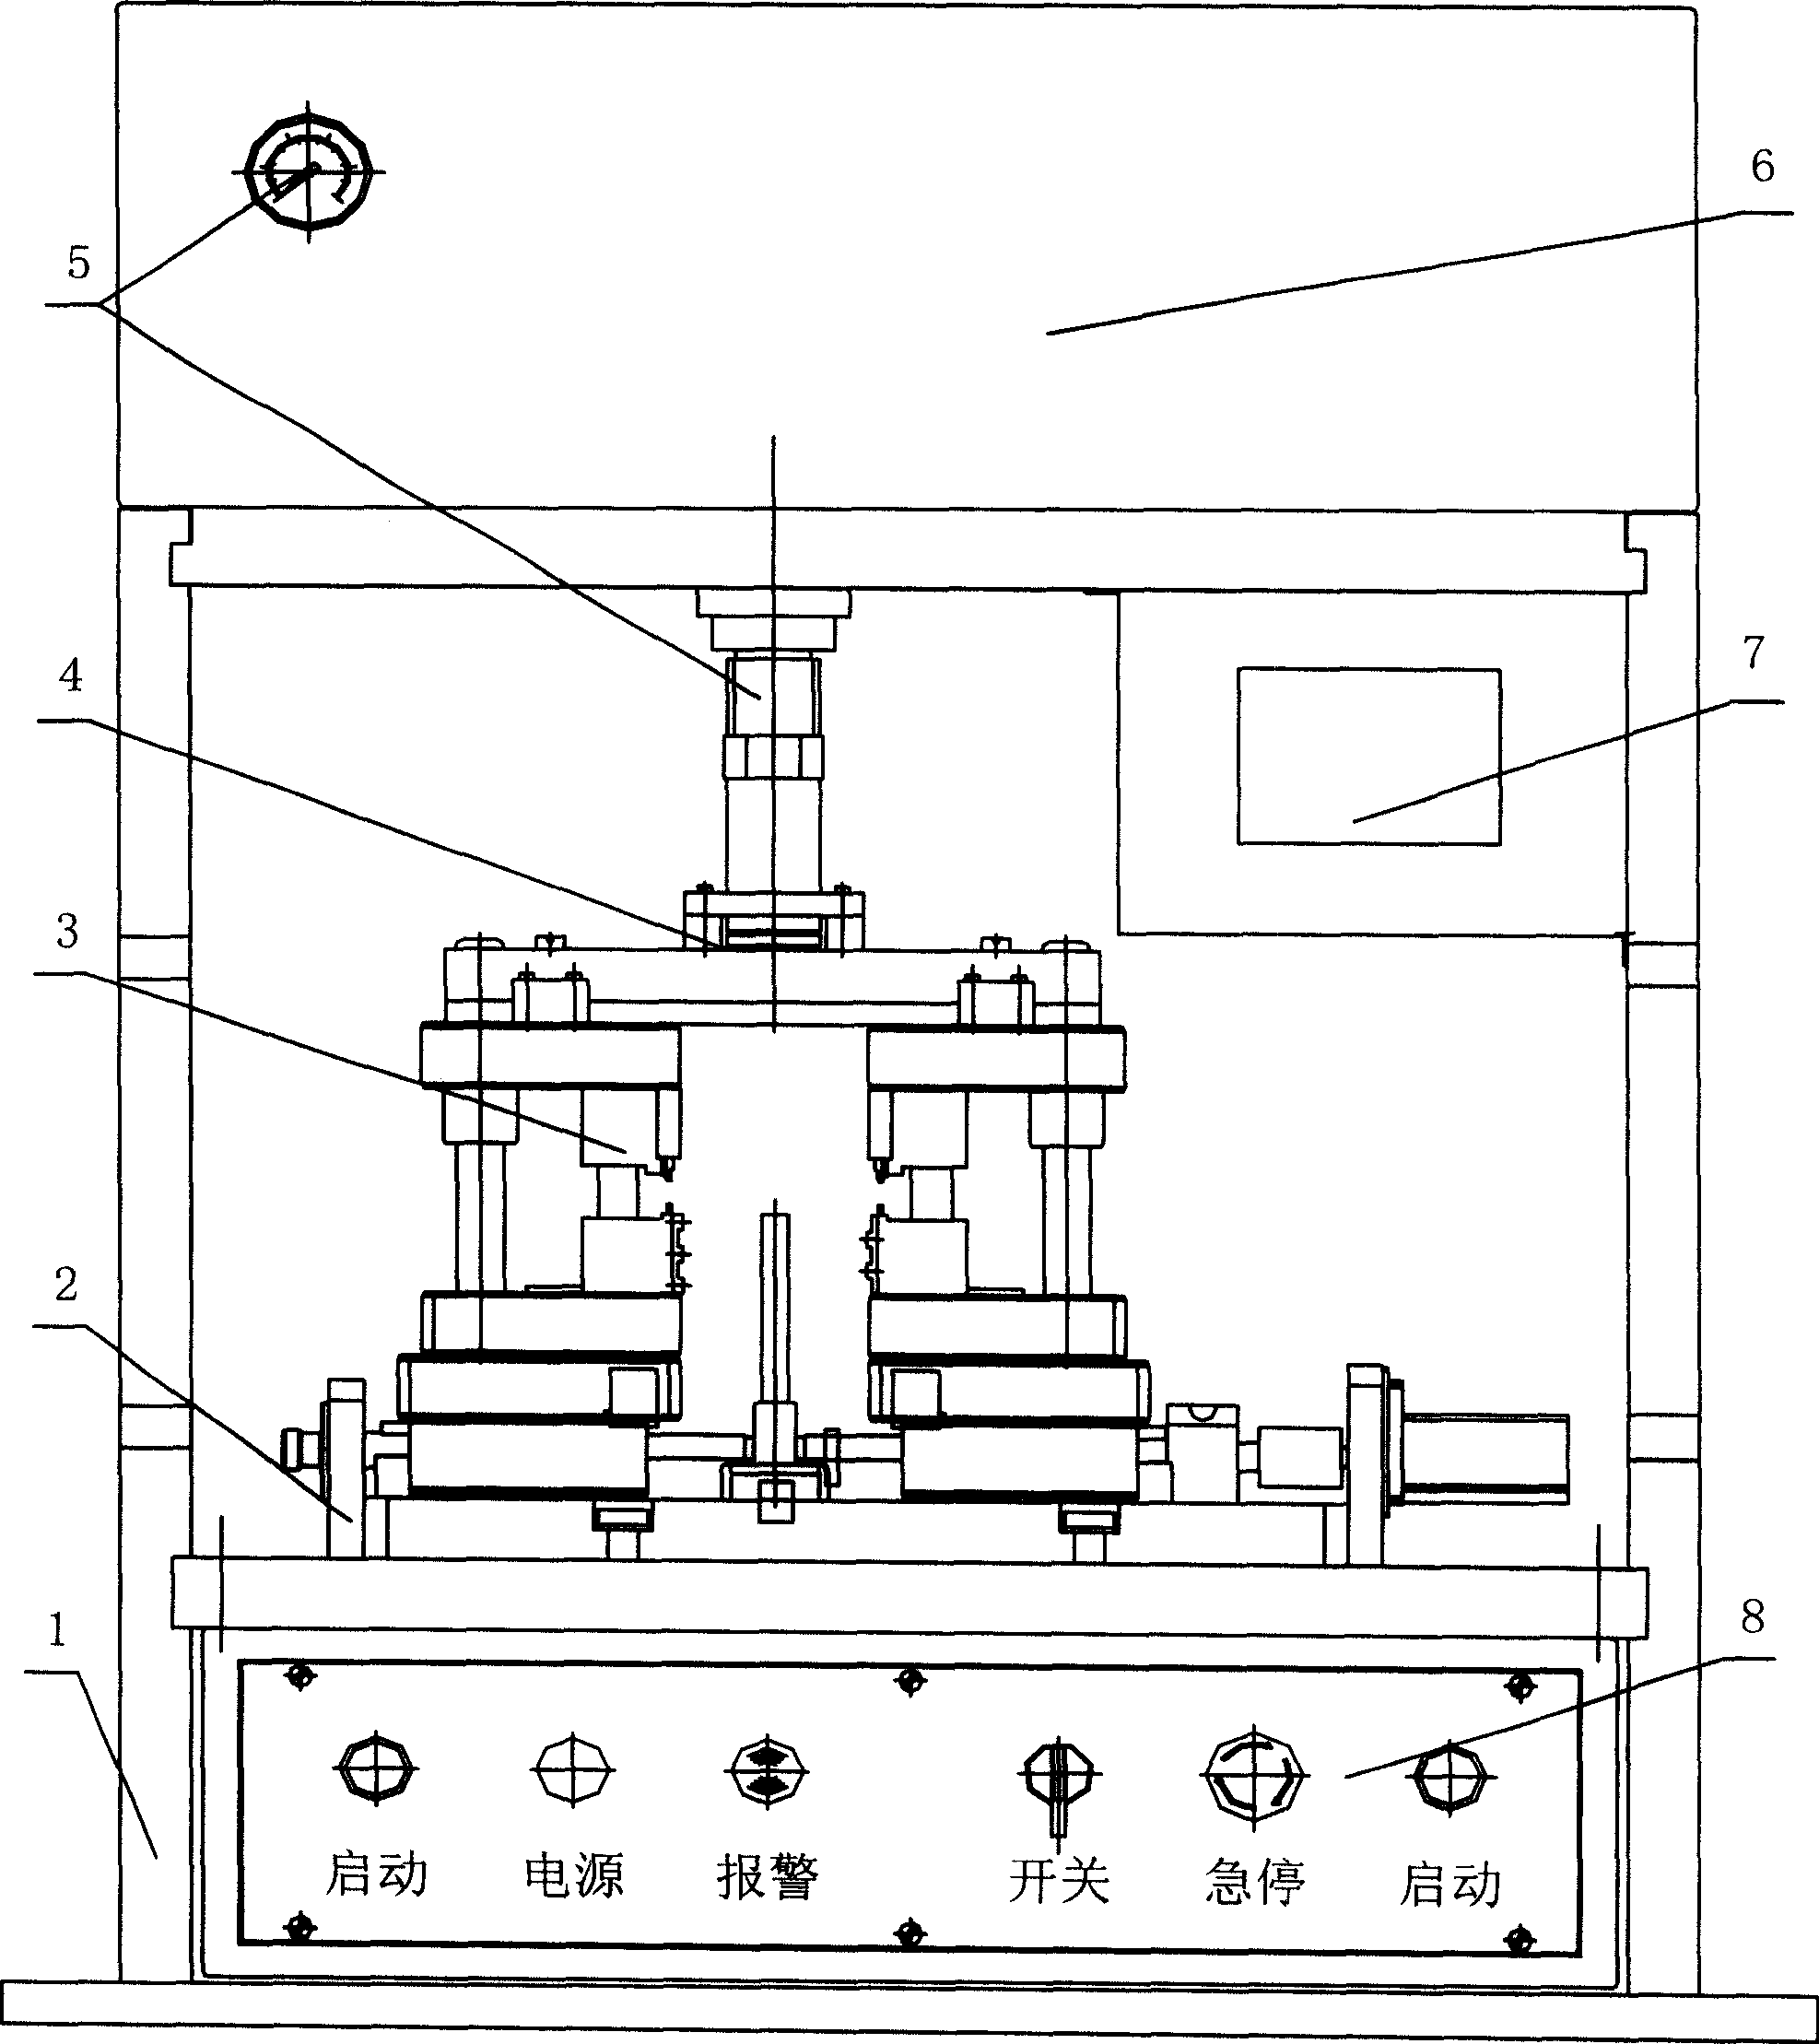 Numerical control forming machine for integrated circuit pin